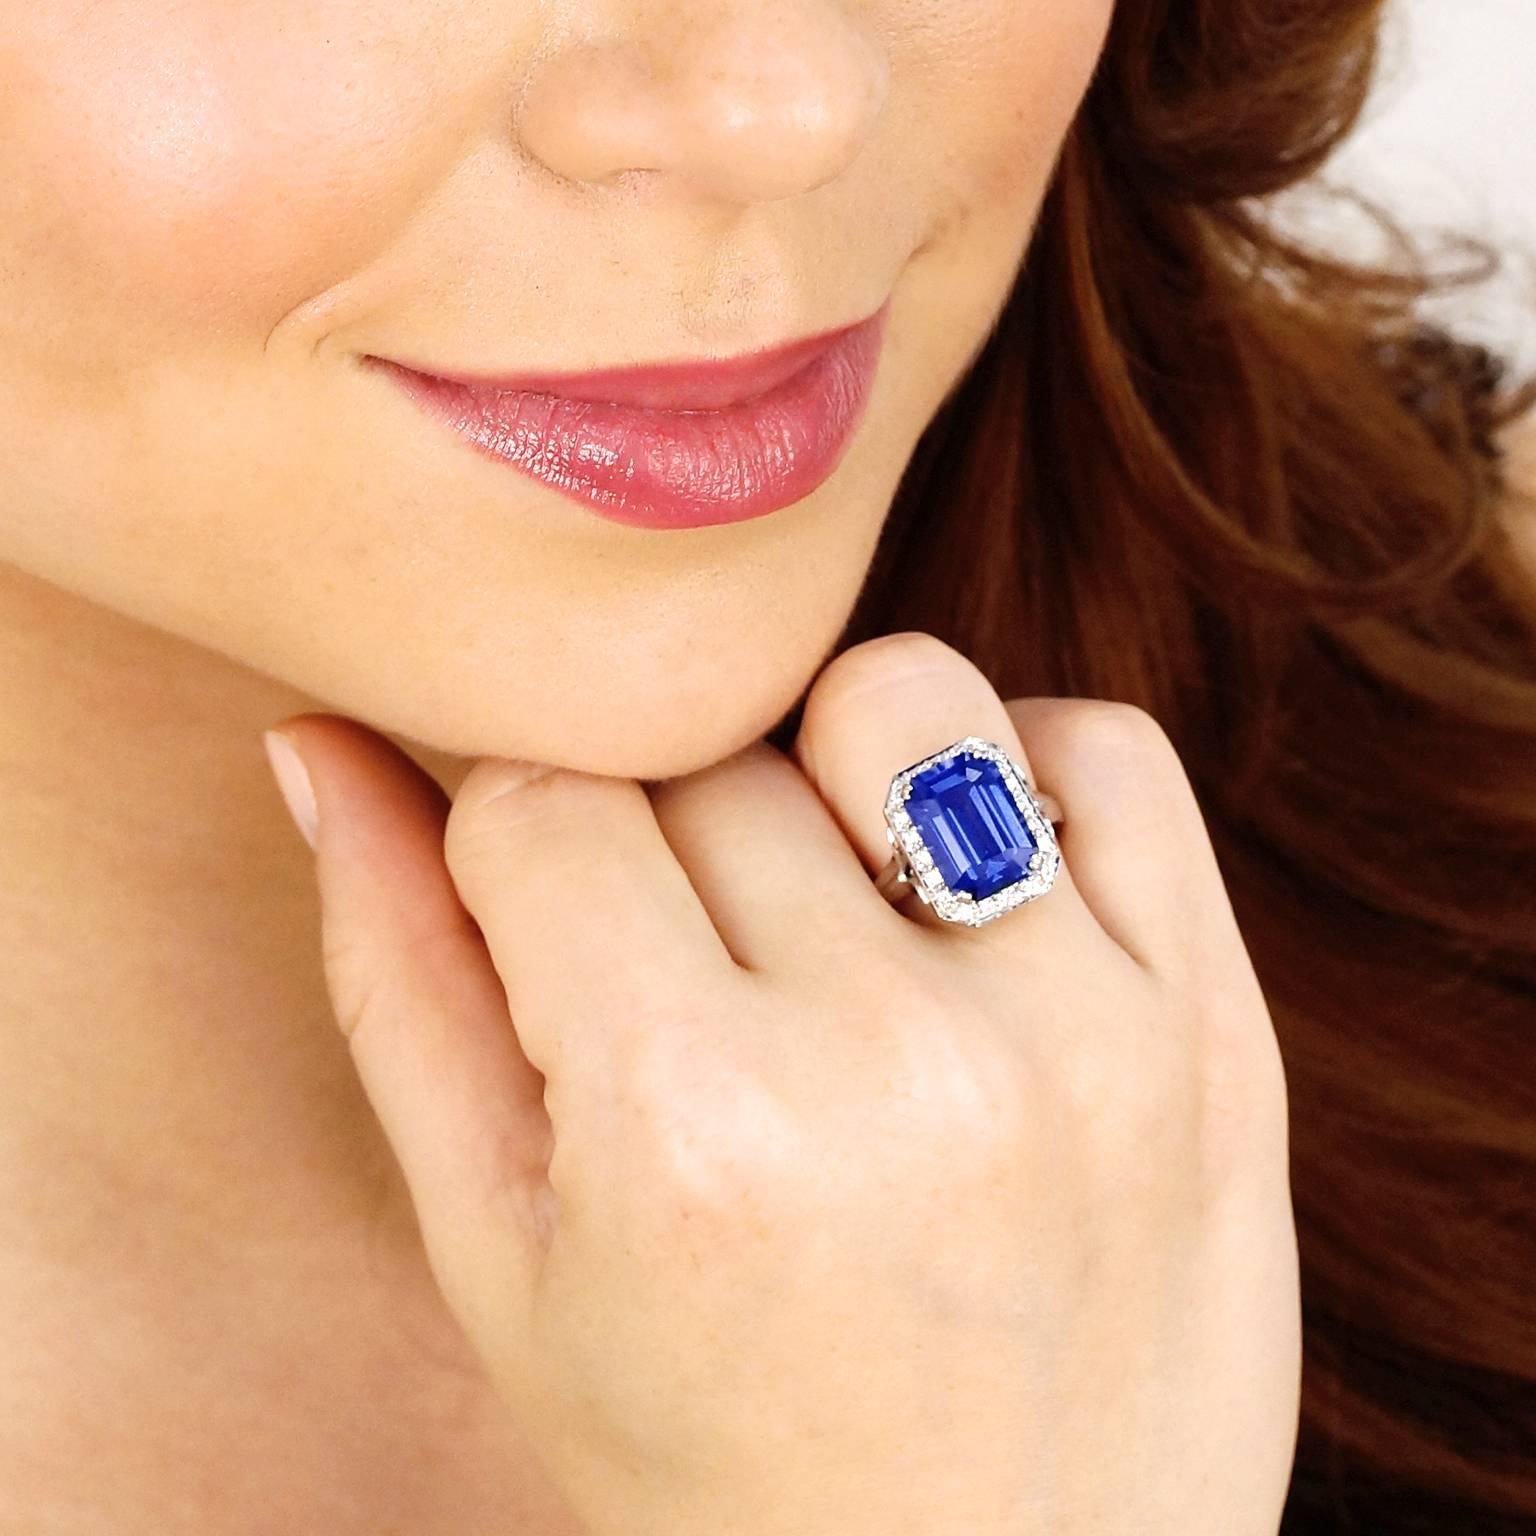 Circa 1980s, 18k, American. This ring is all about the lush 7.0 carat emerald cut tanzanite. Its brilliant deep lavender-blue color is sublime. Additionally set with .48 carats of superb white accent diamonds, this ring features classical design and